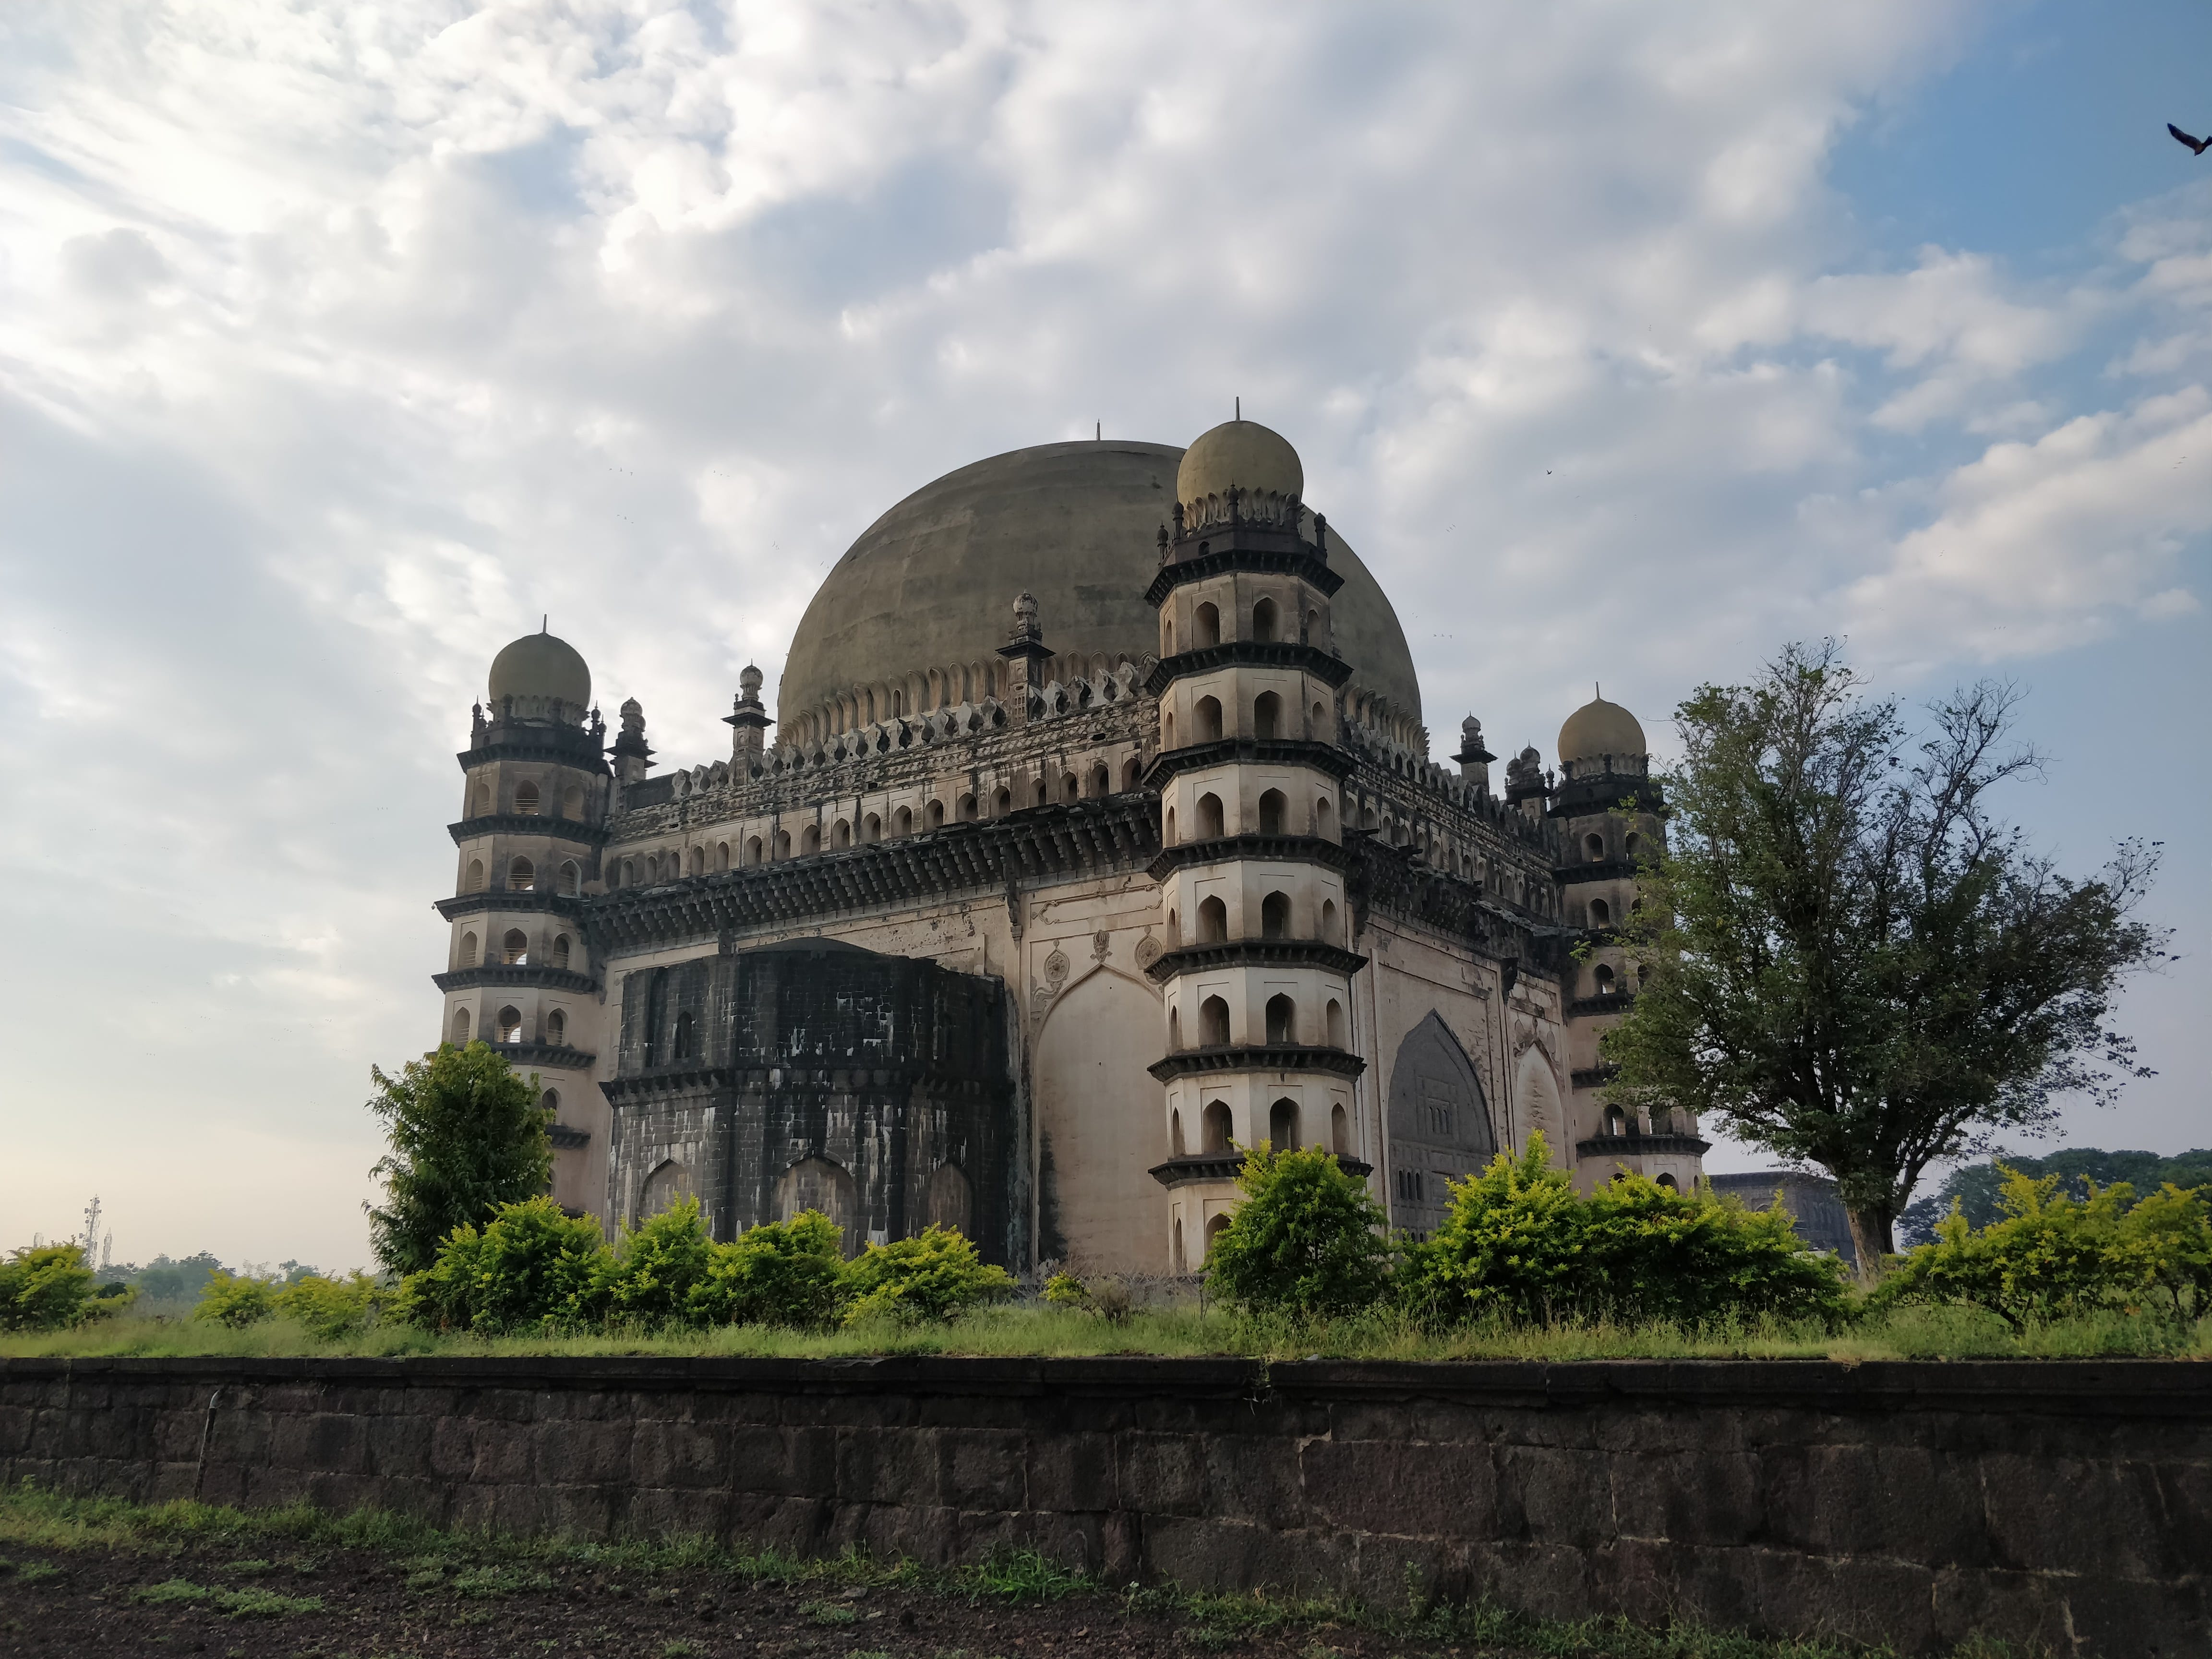 Gol Gumbaz as seen from the walkway around the complex